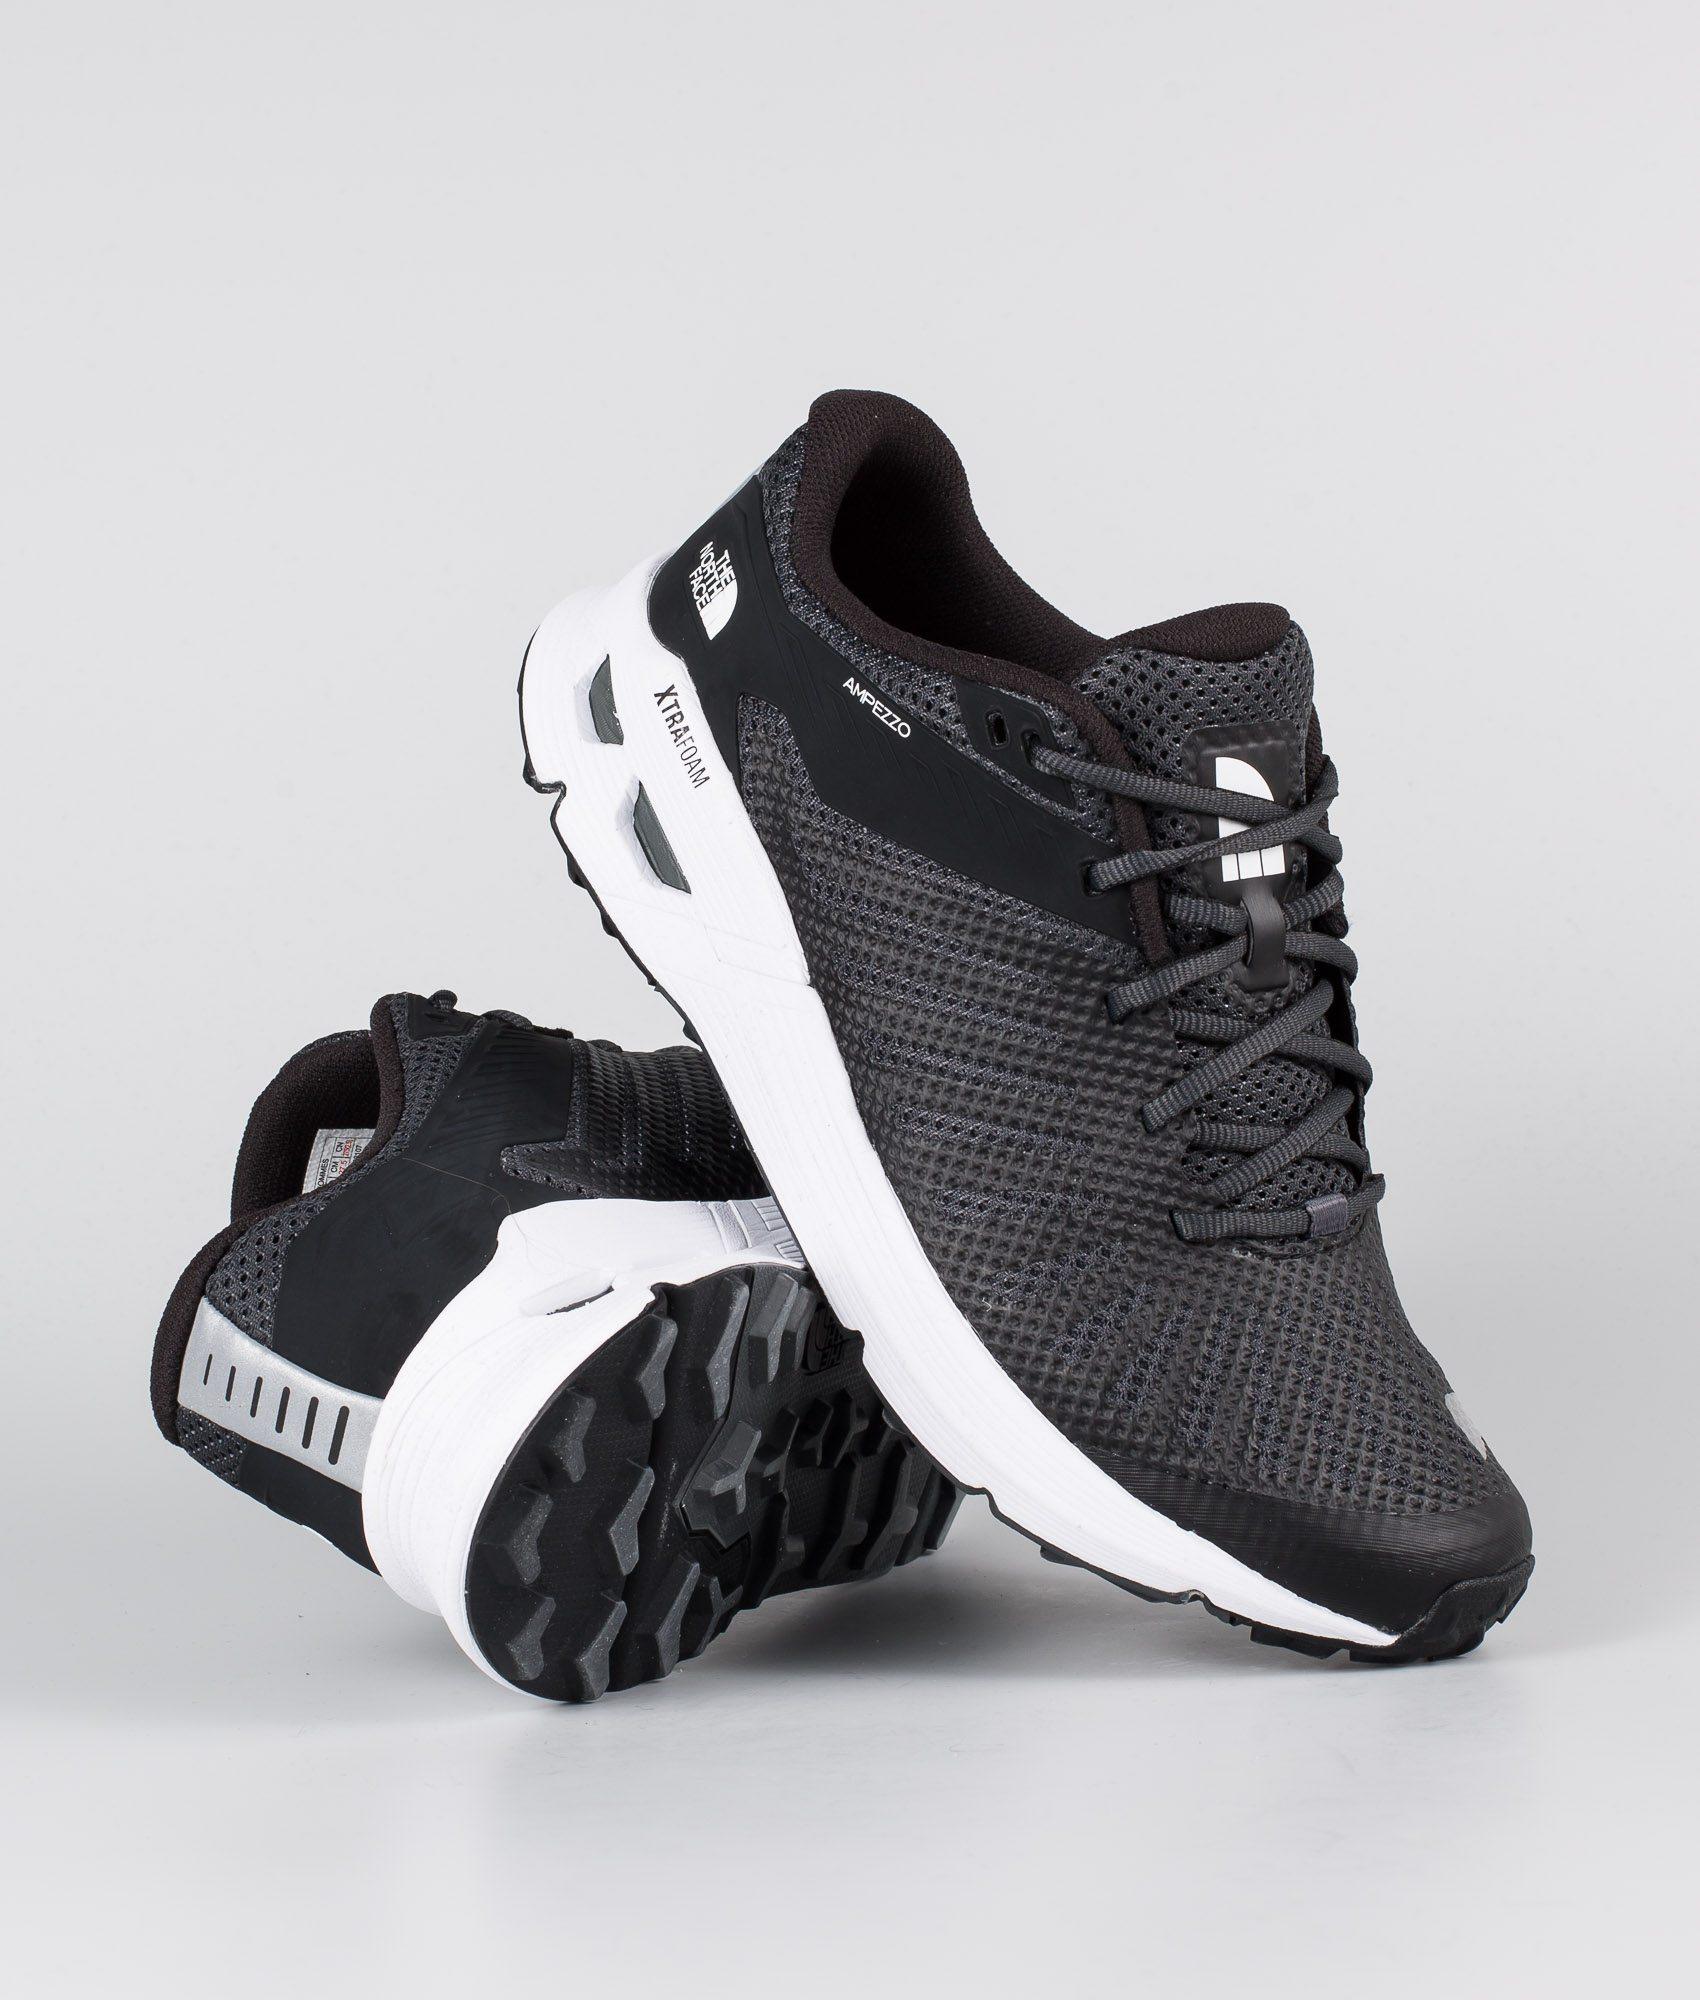 The North Face Ampezzo Shoes Darkshadow 